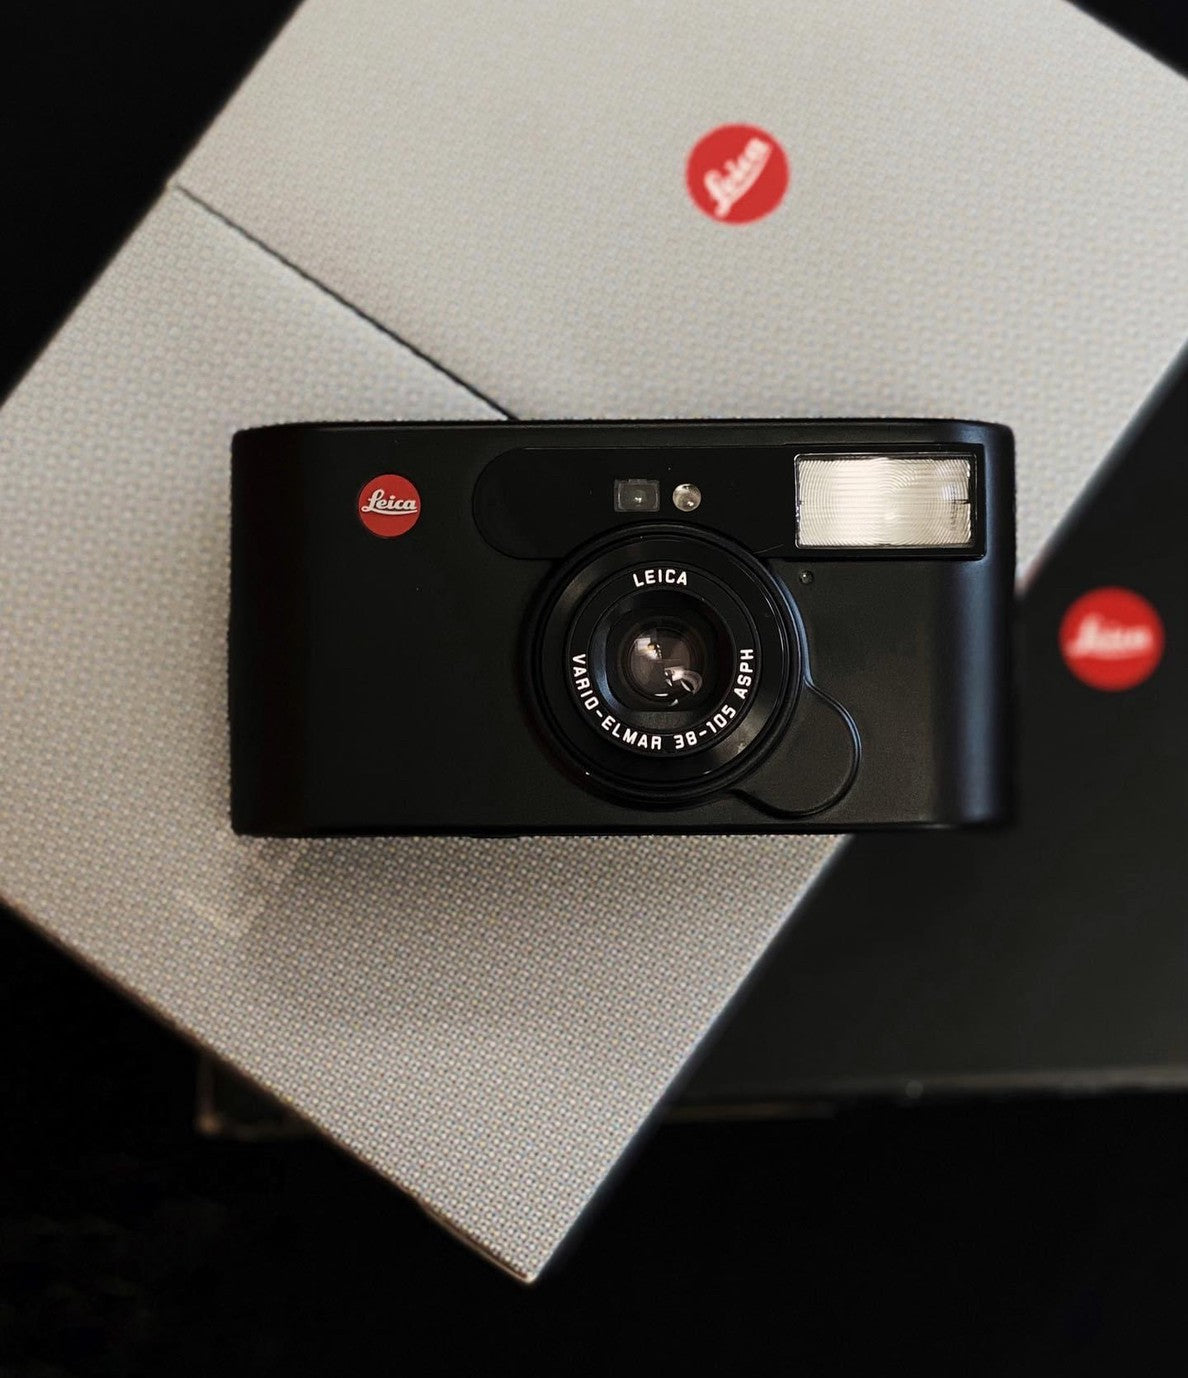 Buy Leica AF-C1 Now Analogue Amsterdam, 55% OFF